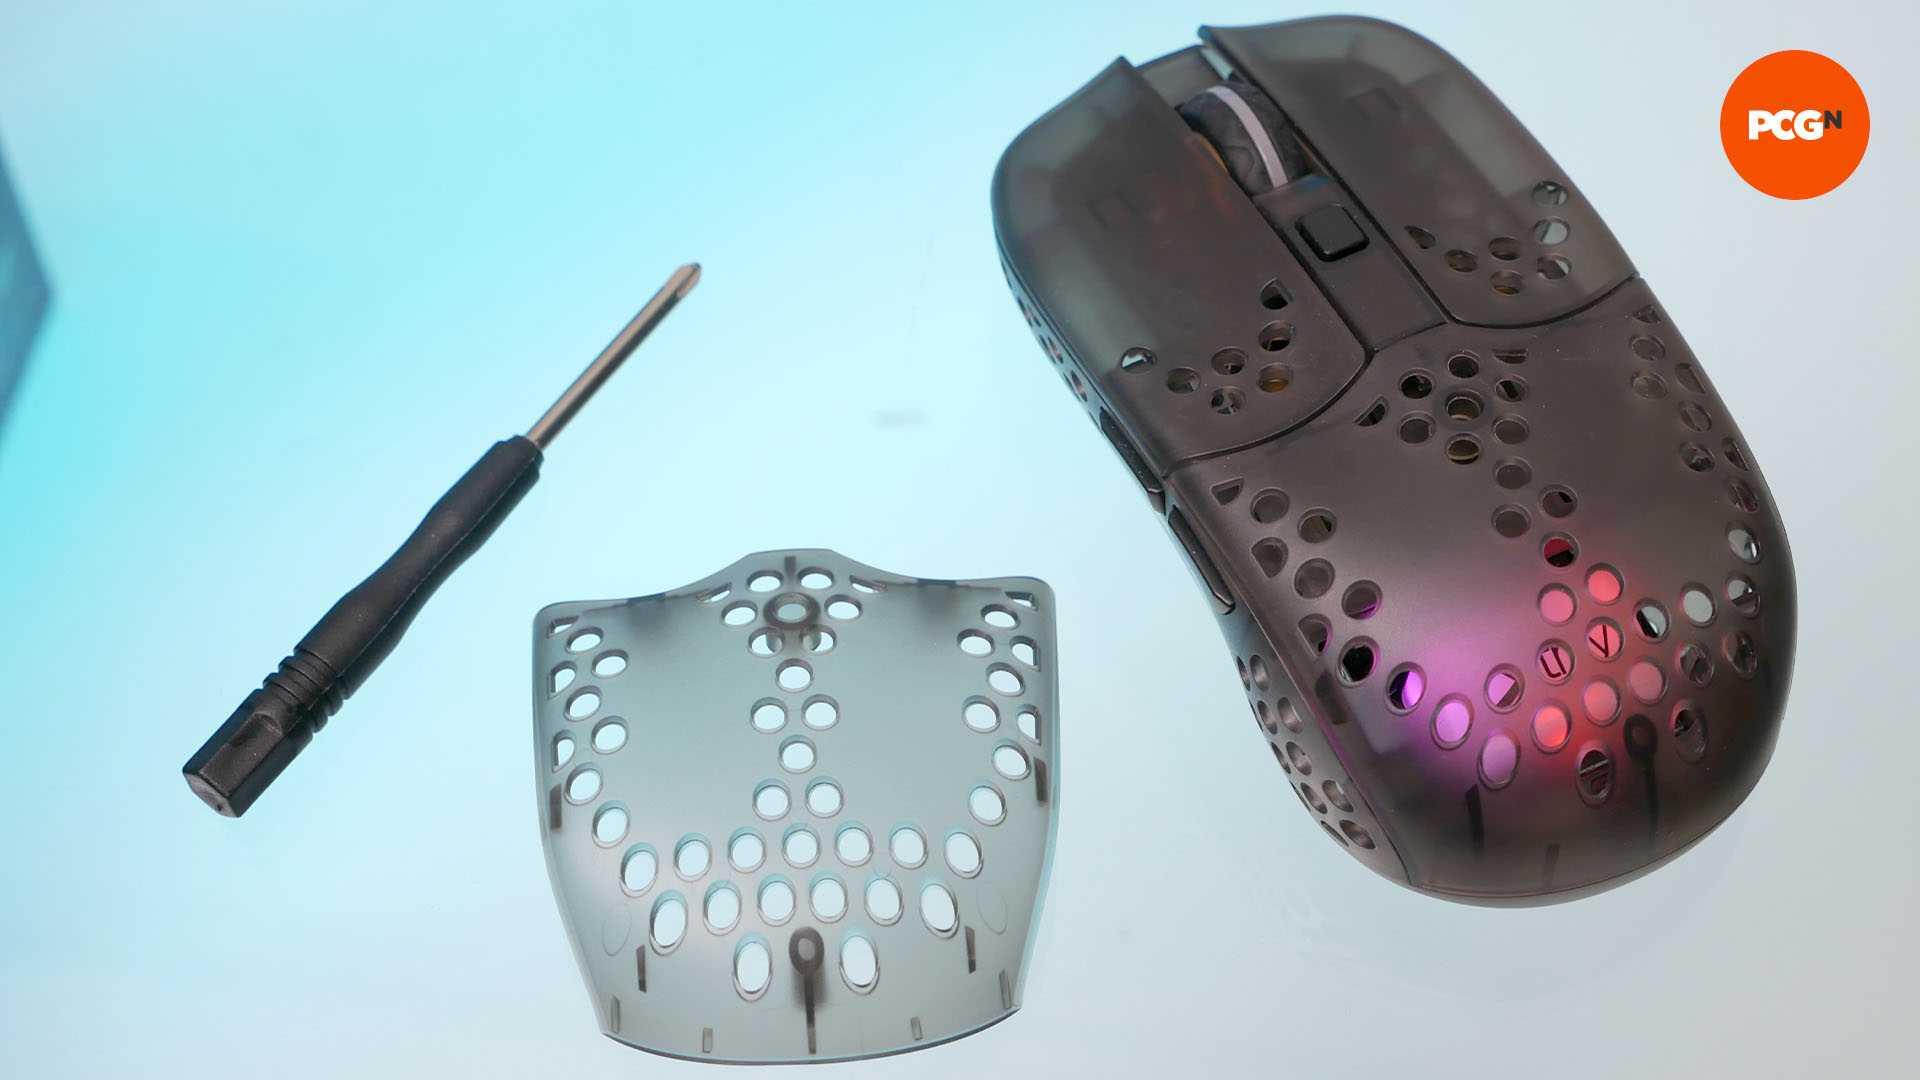 A spare top plate of the cherry xtrfy MZ1 wireless mouse along with a screwdriver